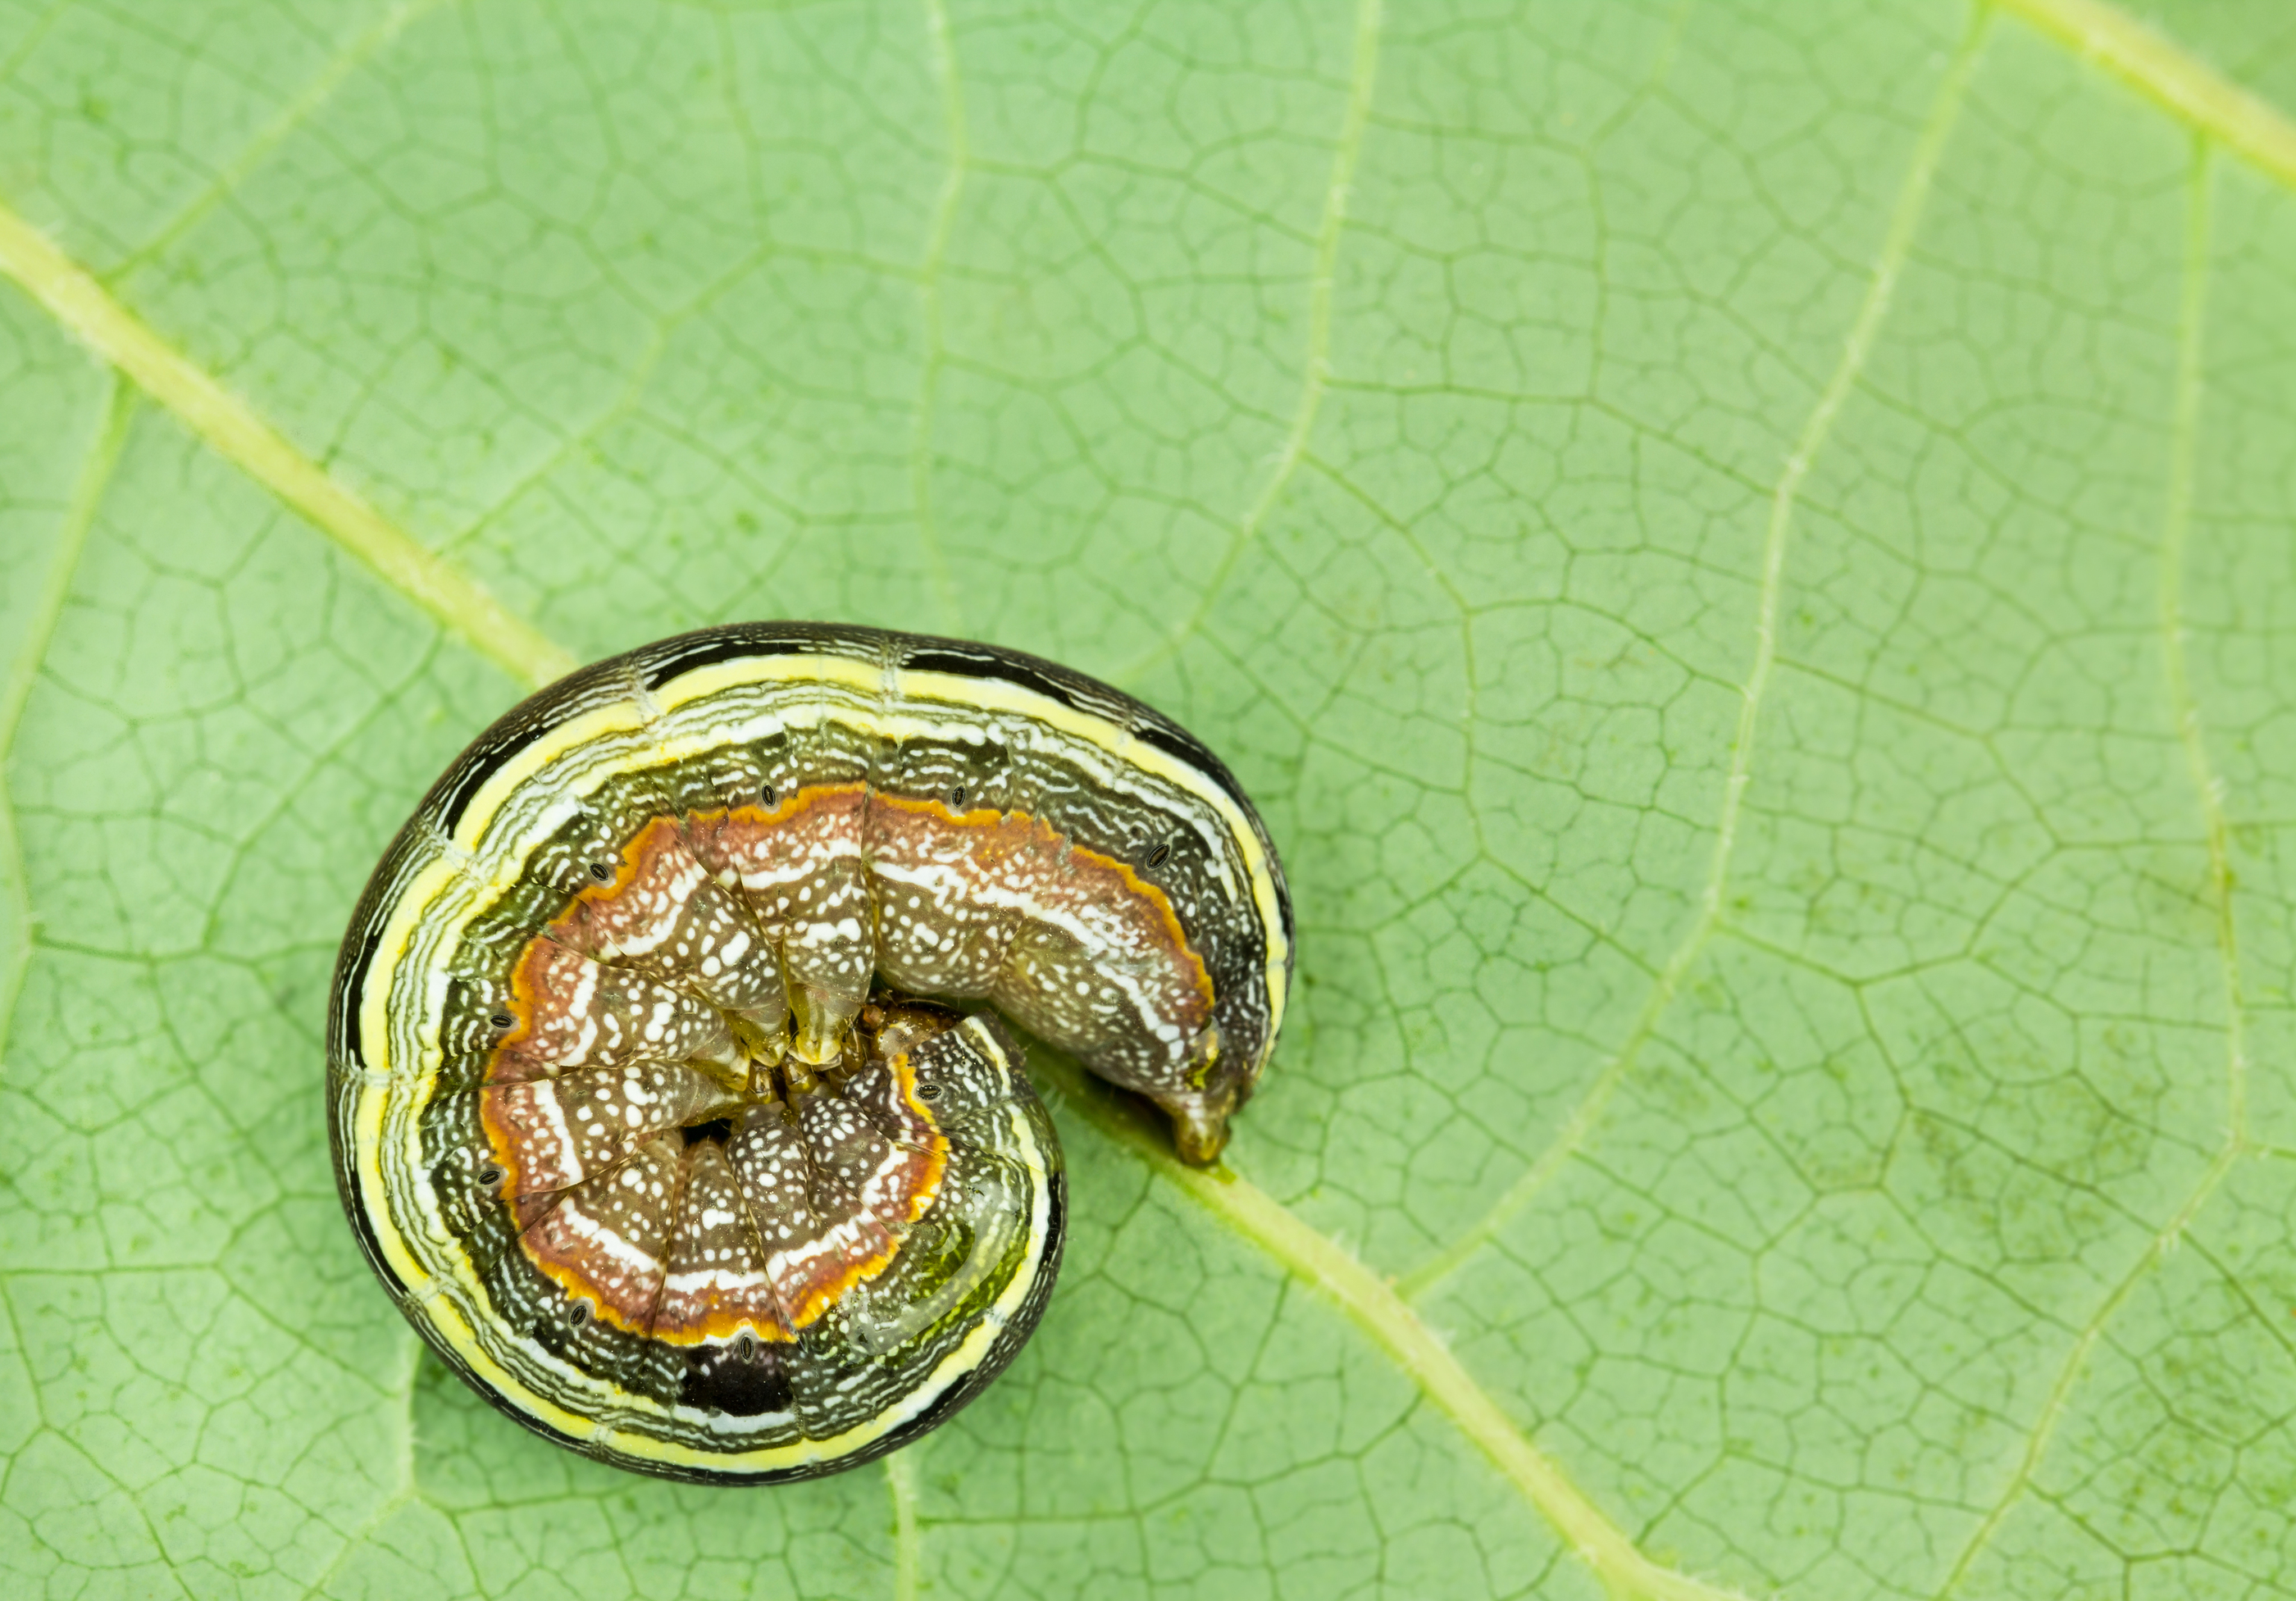 army worm curled up on a leaf